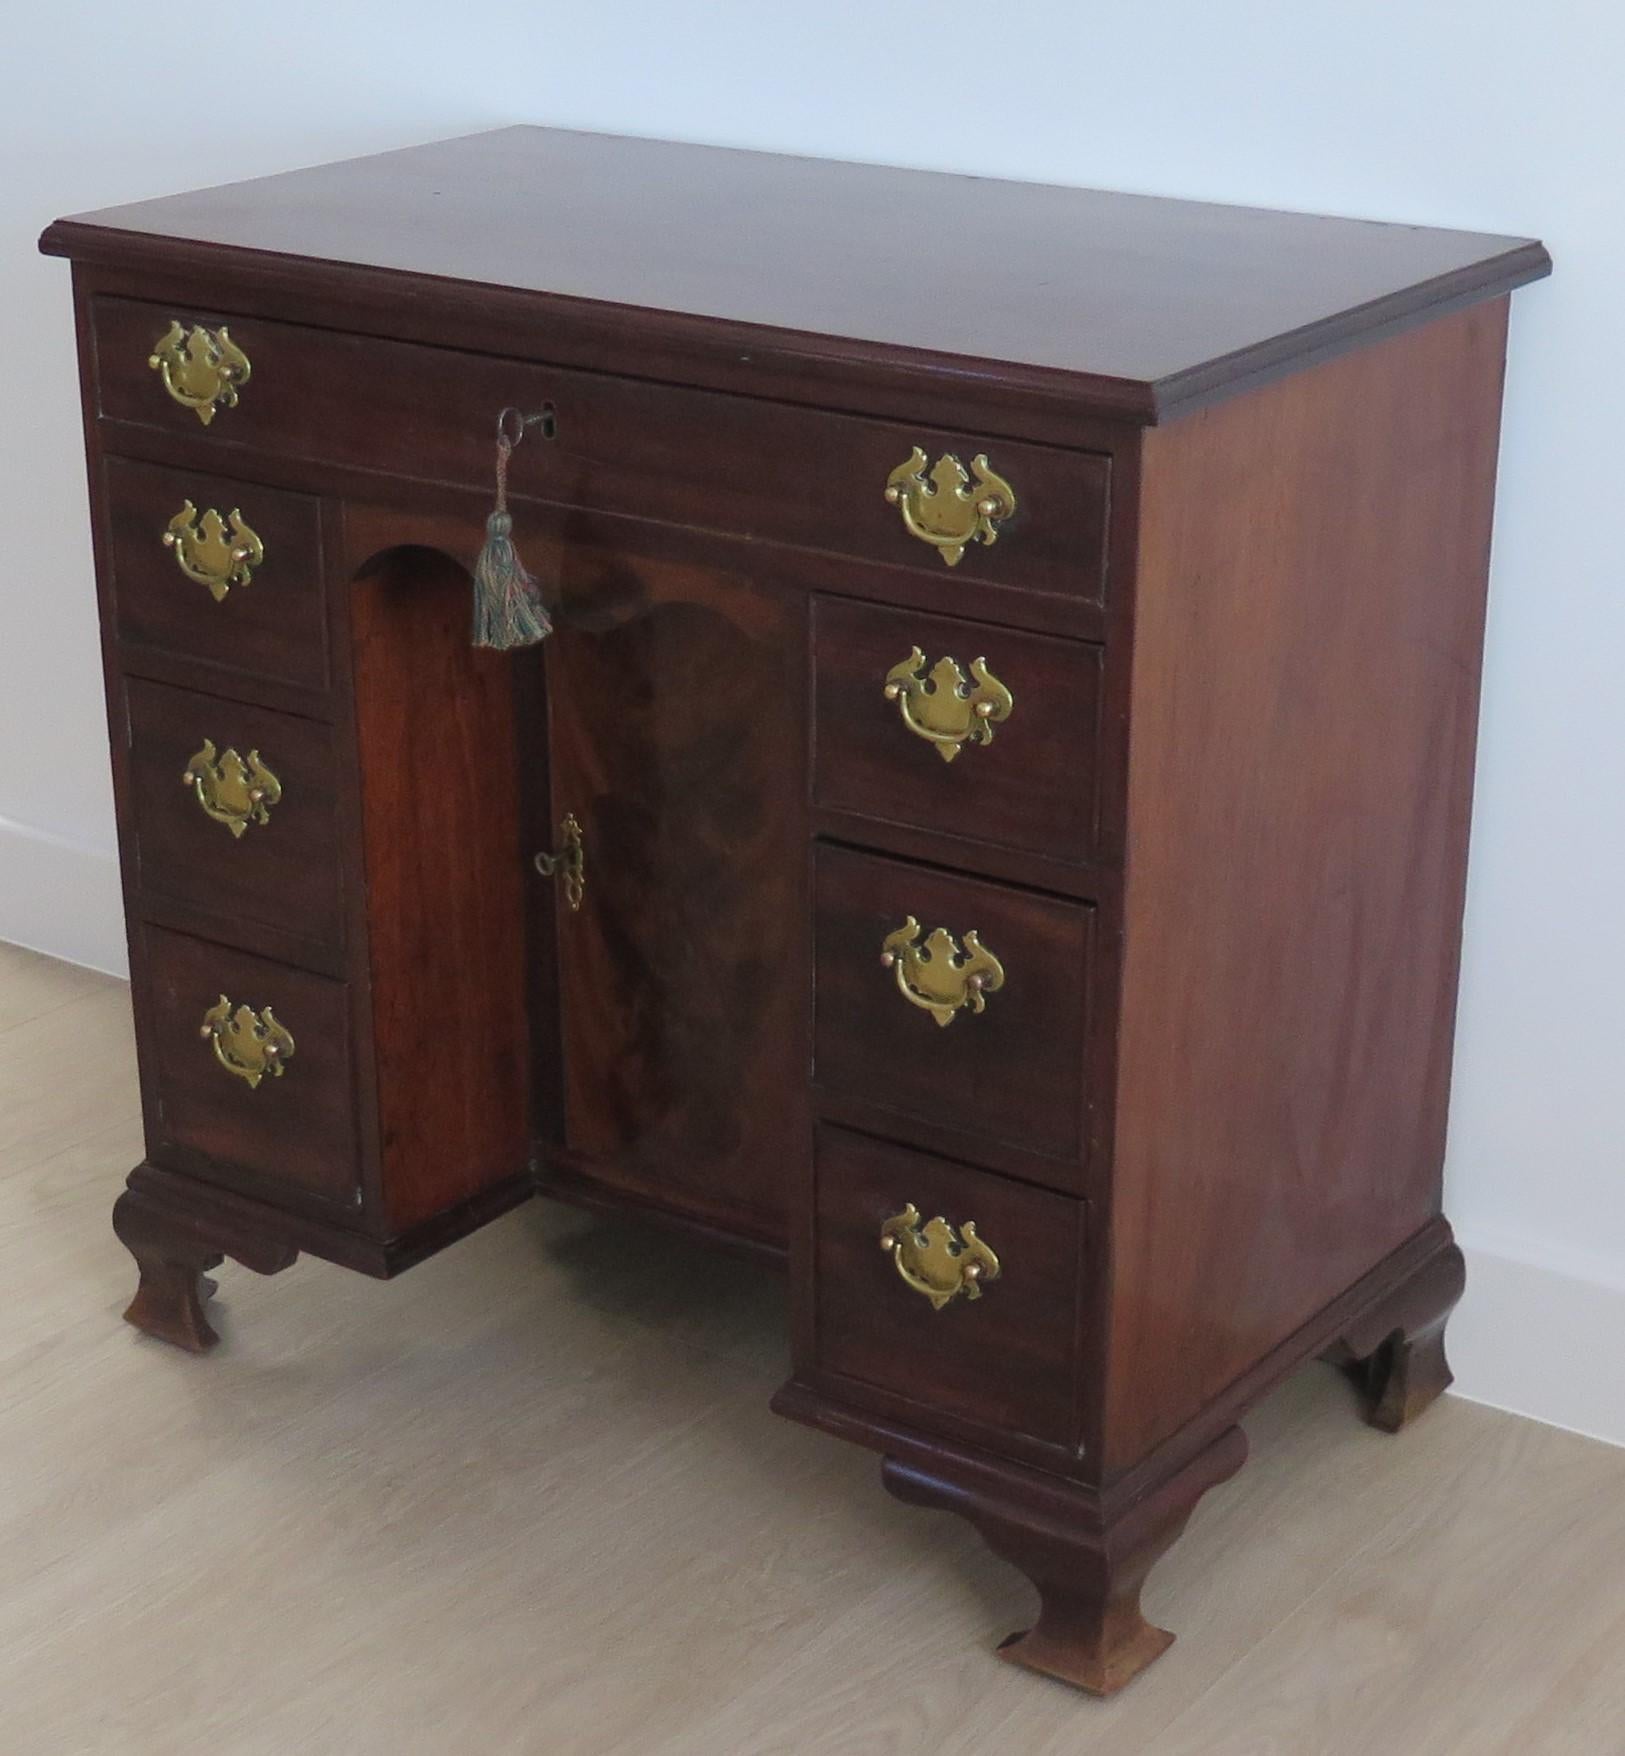 Hand-Crafted George 11nd small Kneehole Desk in Mahogany, English Circa 1745 For Sale